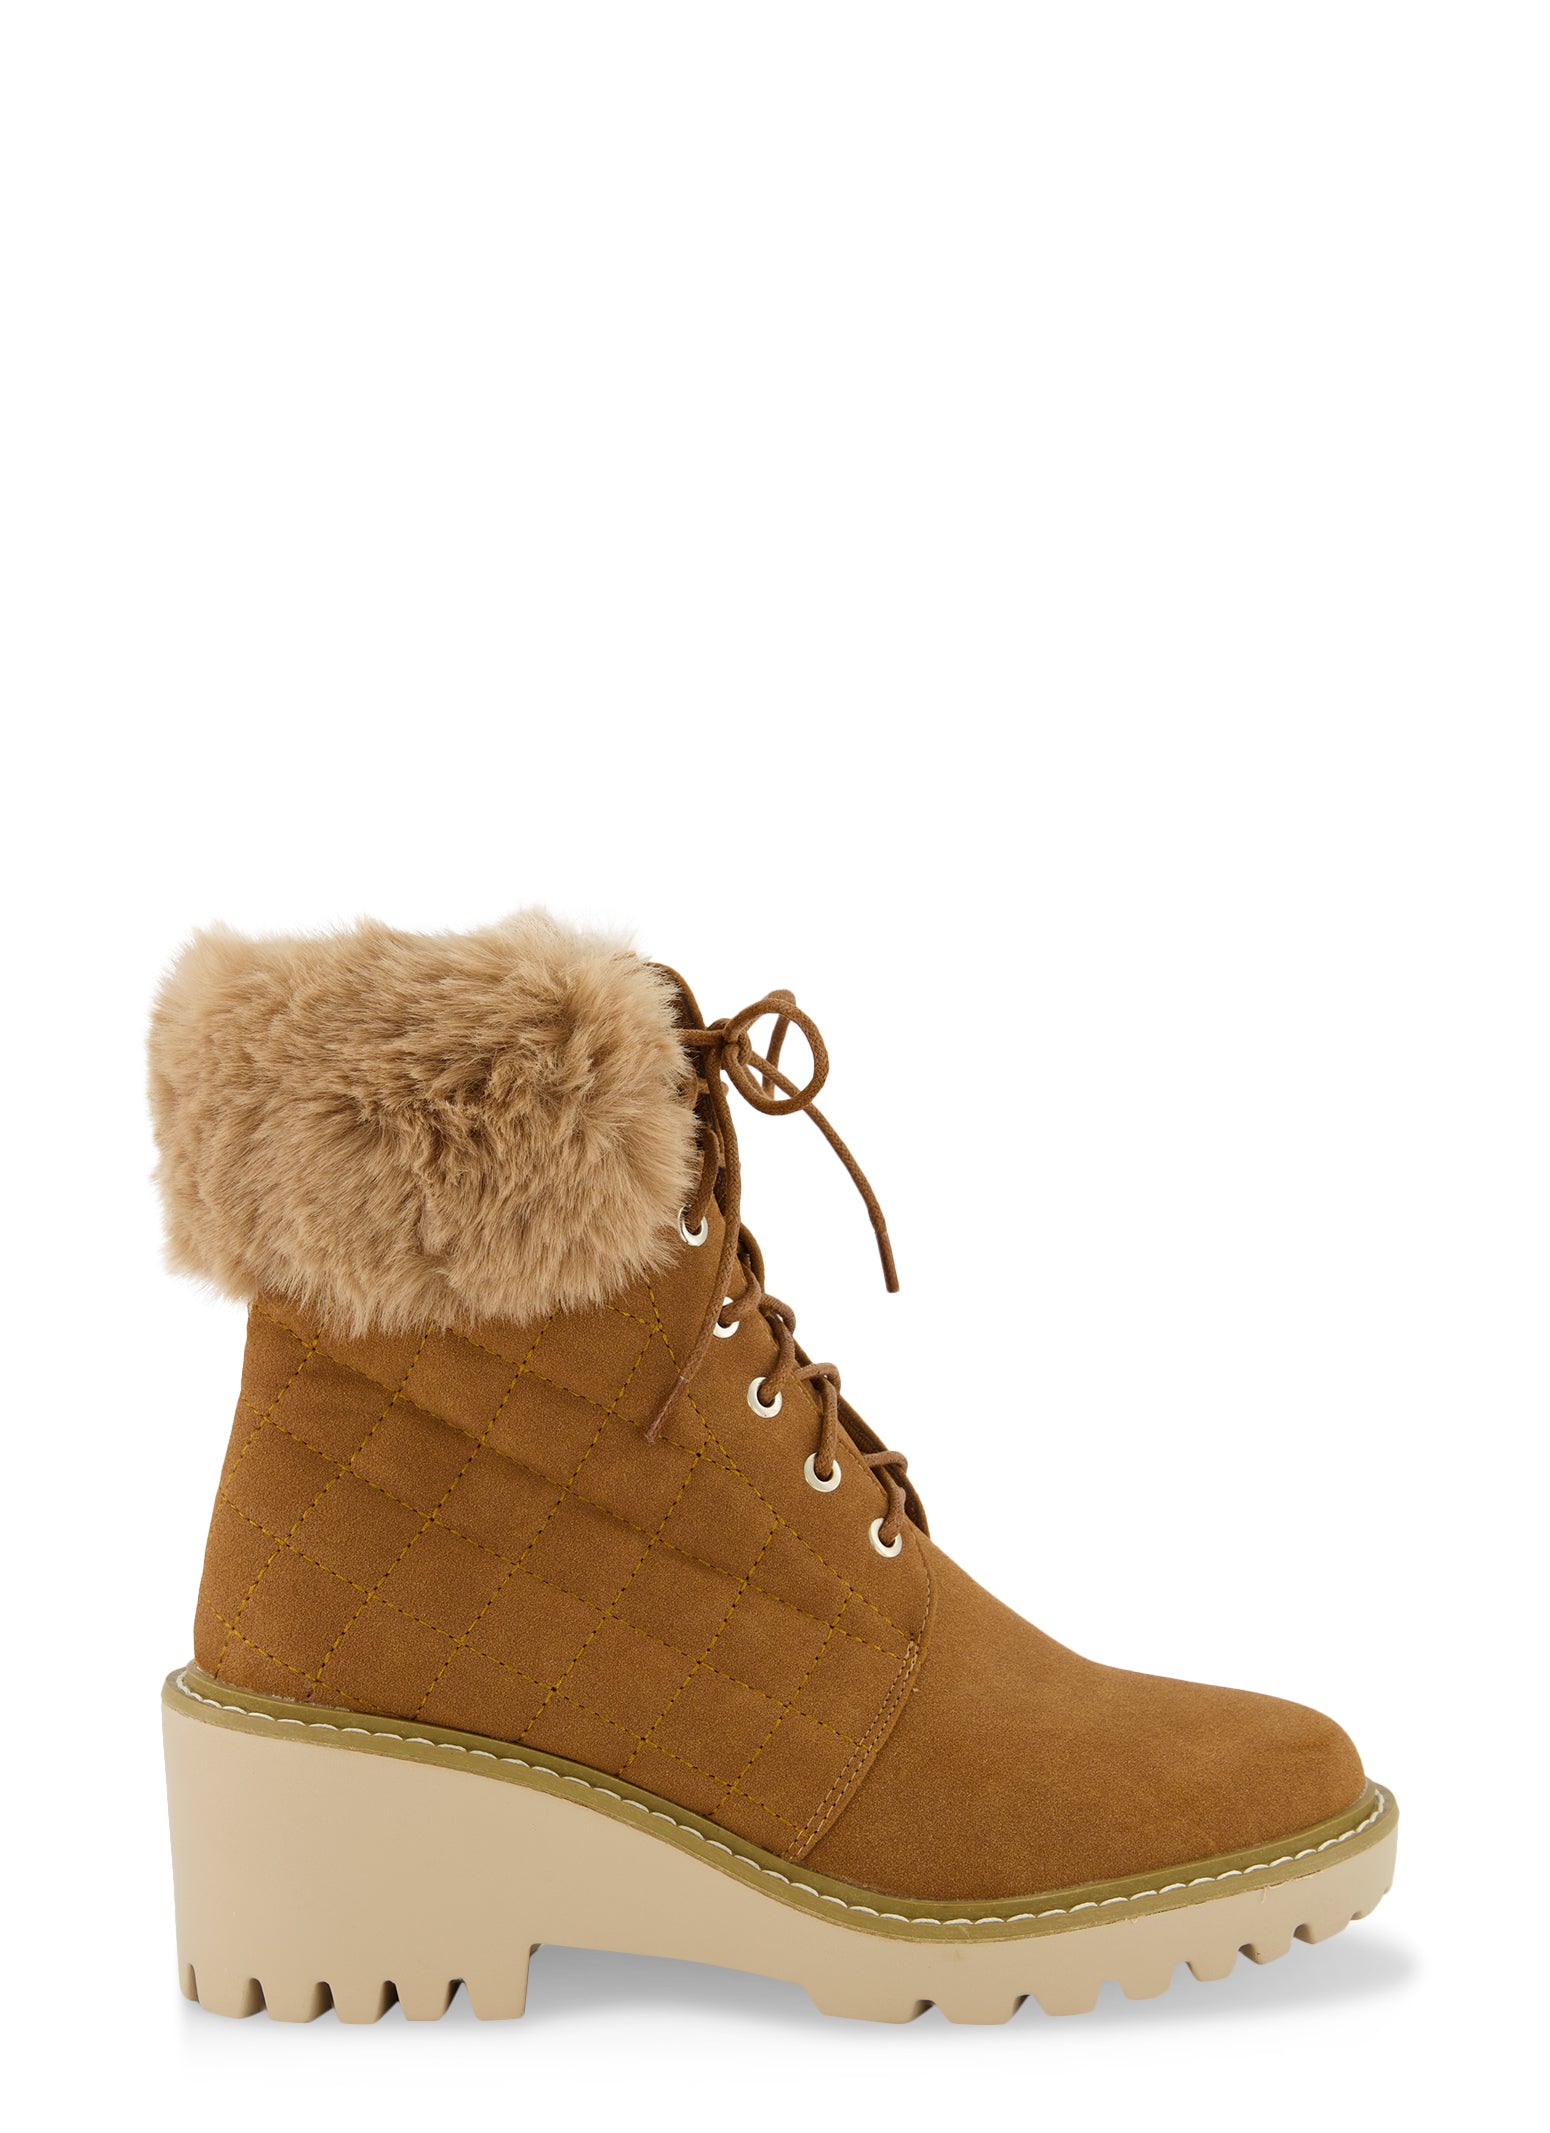 Faux Fur Trim Lace Up Wedge Booties